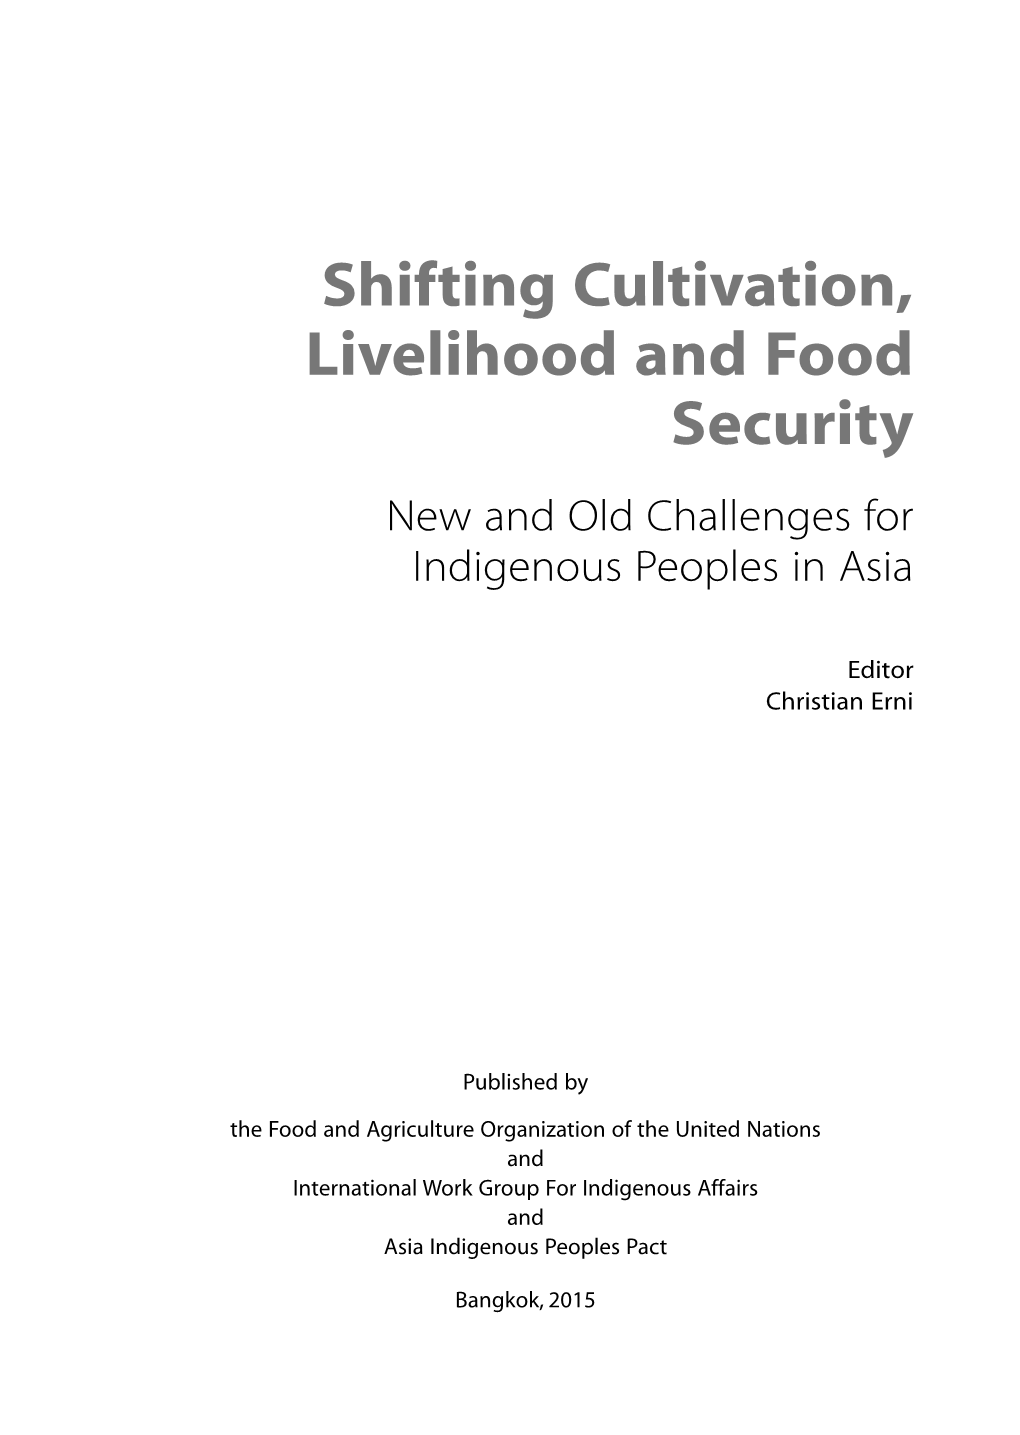 Shifting Cultivation, Livelihood and Food Security. New and Old Challenges